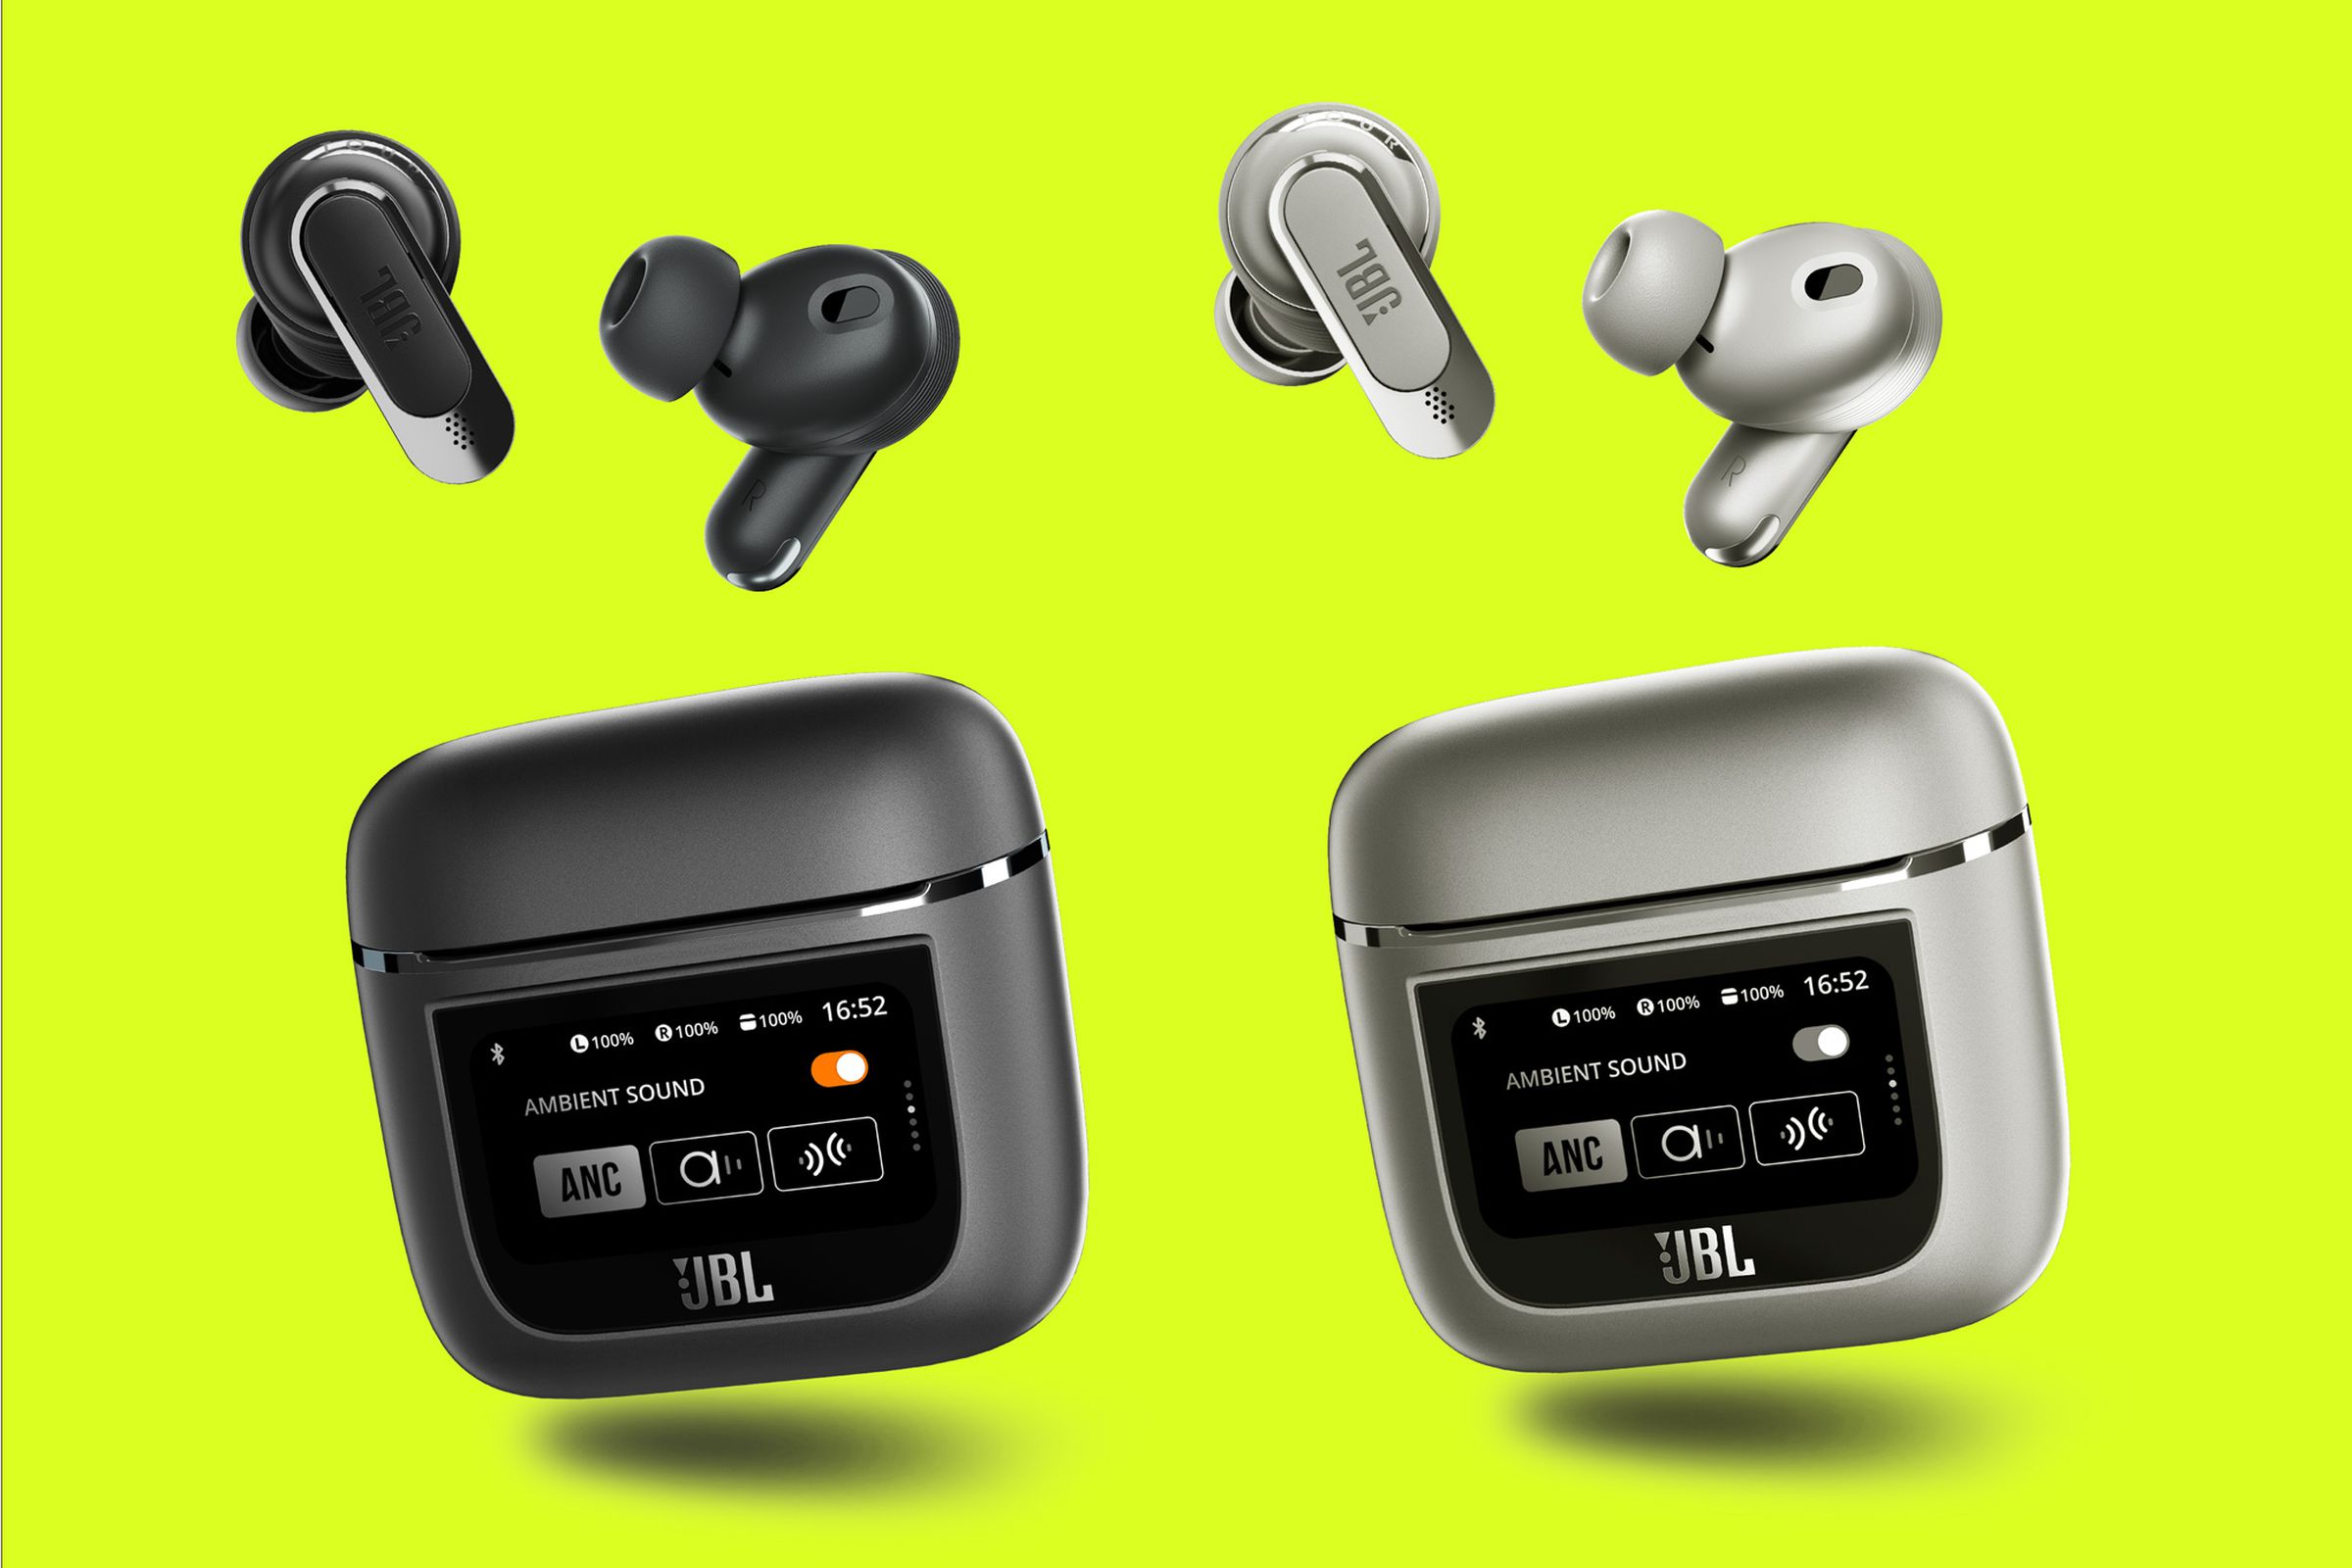 Tour Pro 2 in black and white color options. The image shows two wireless earbuds with short stems above a small horizontal case with a mostly black-and-white screen presenting noise cancellation options.